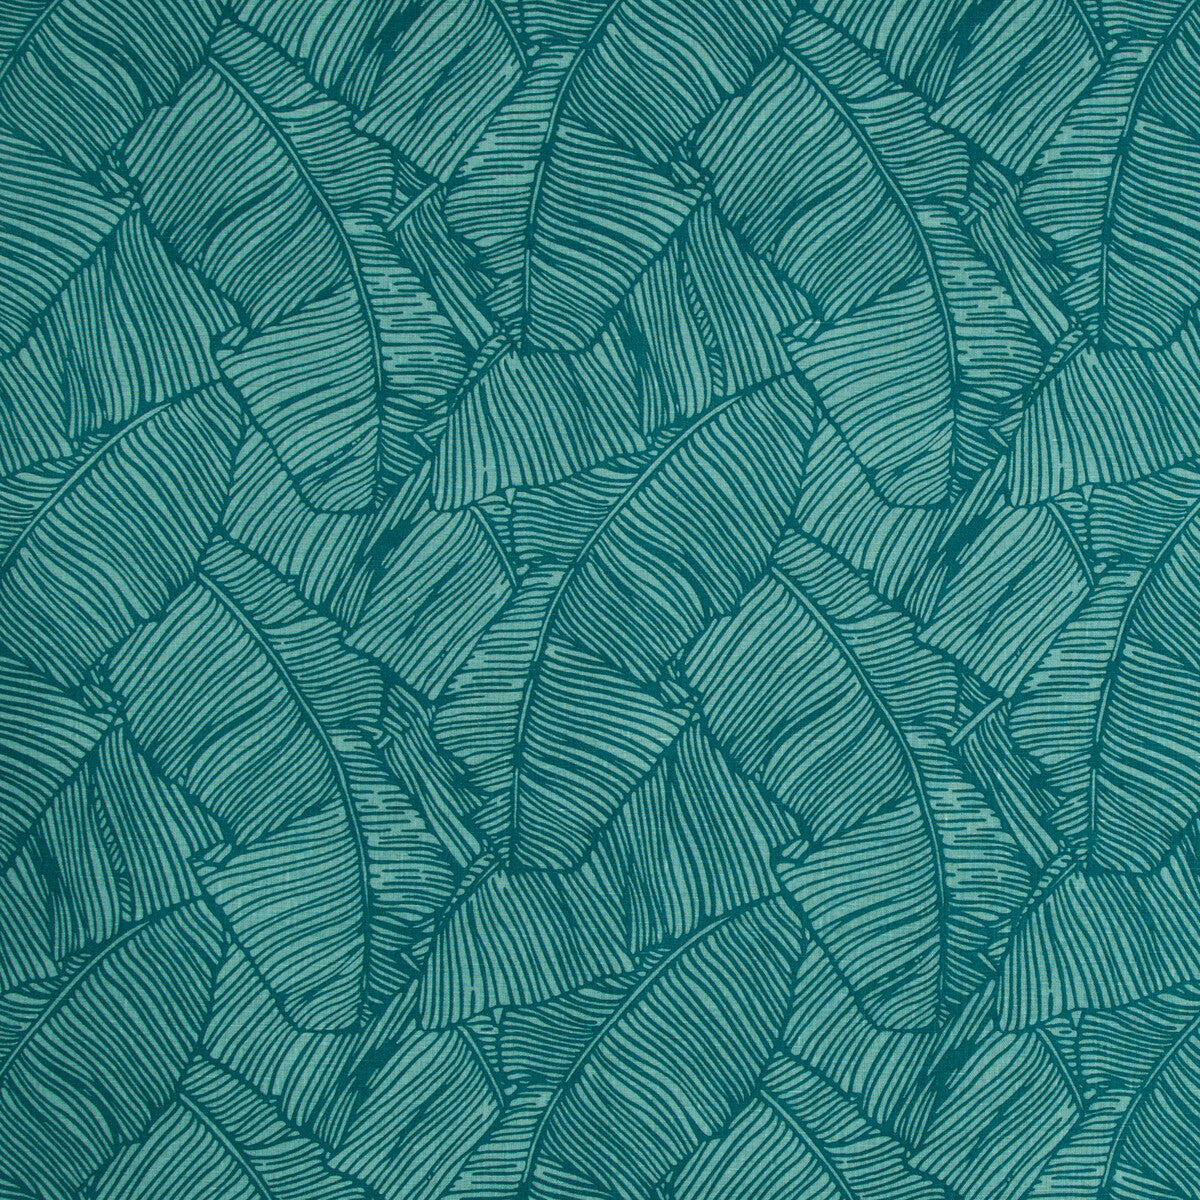 Les Palmiers Print fabric in teal color - pattern 8017134.13.0 - by Brunschwig &amp; Fils in the Les Ensembliers collection